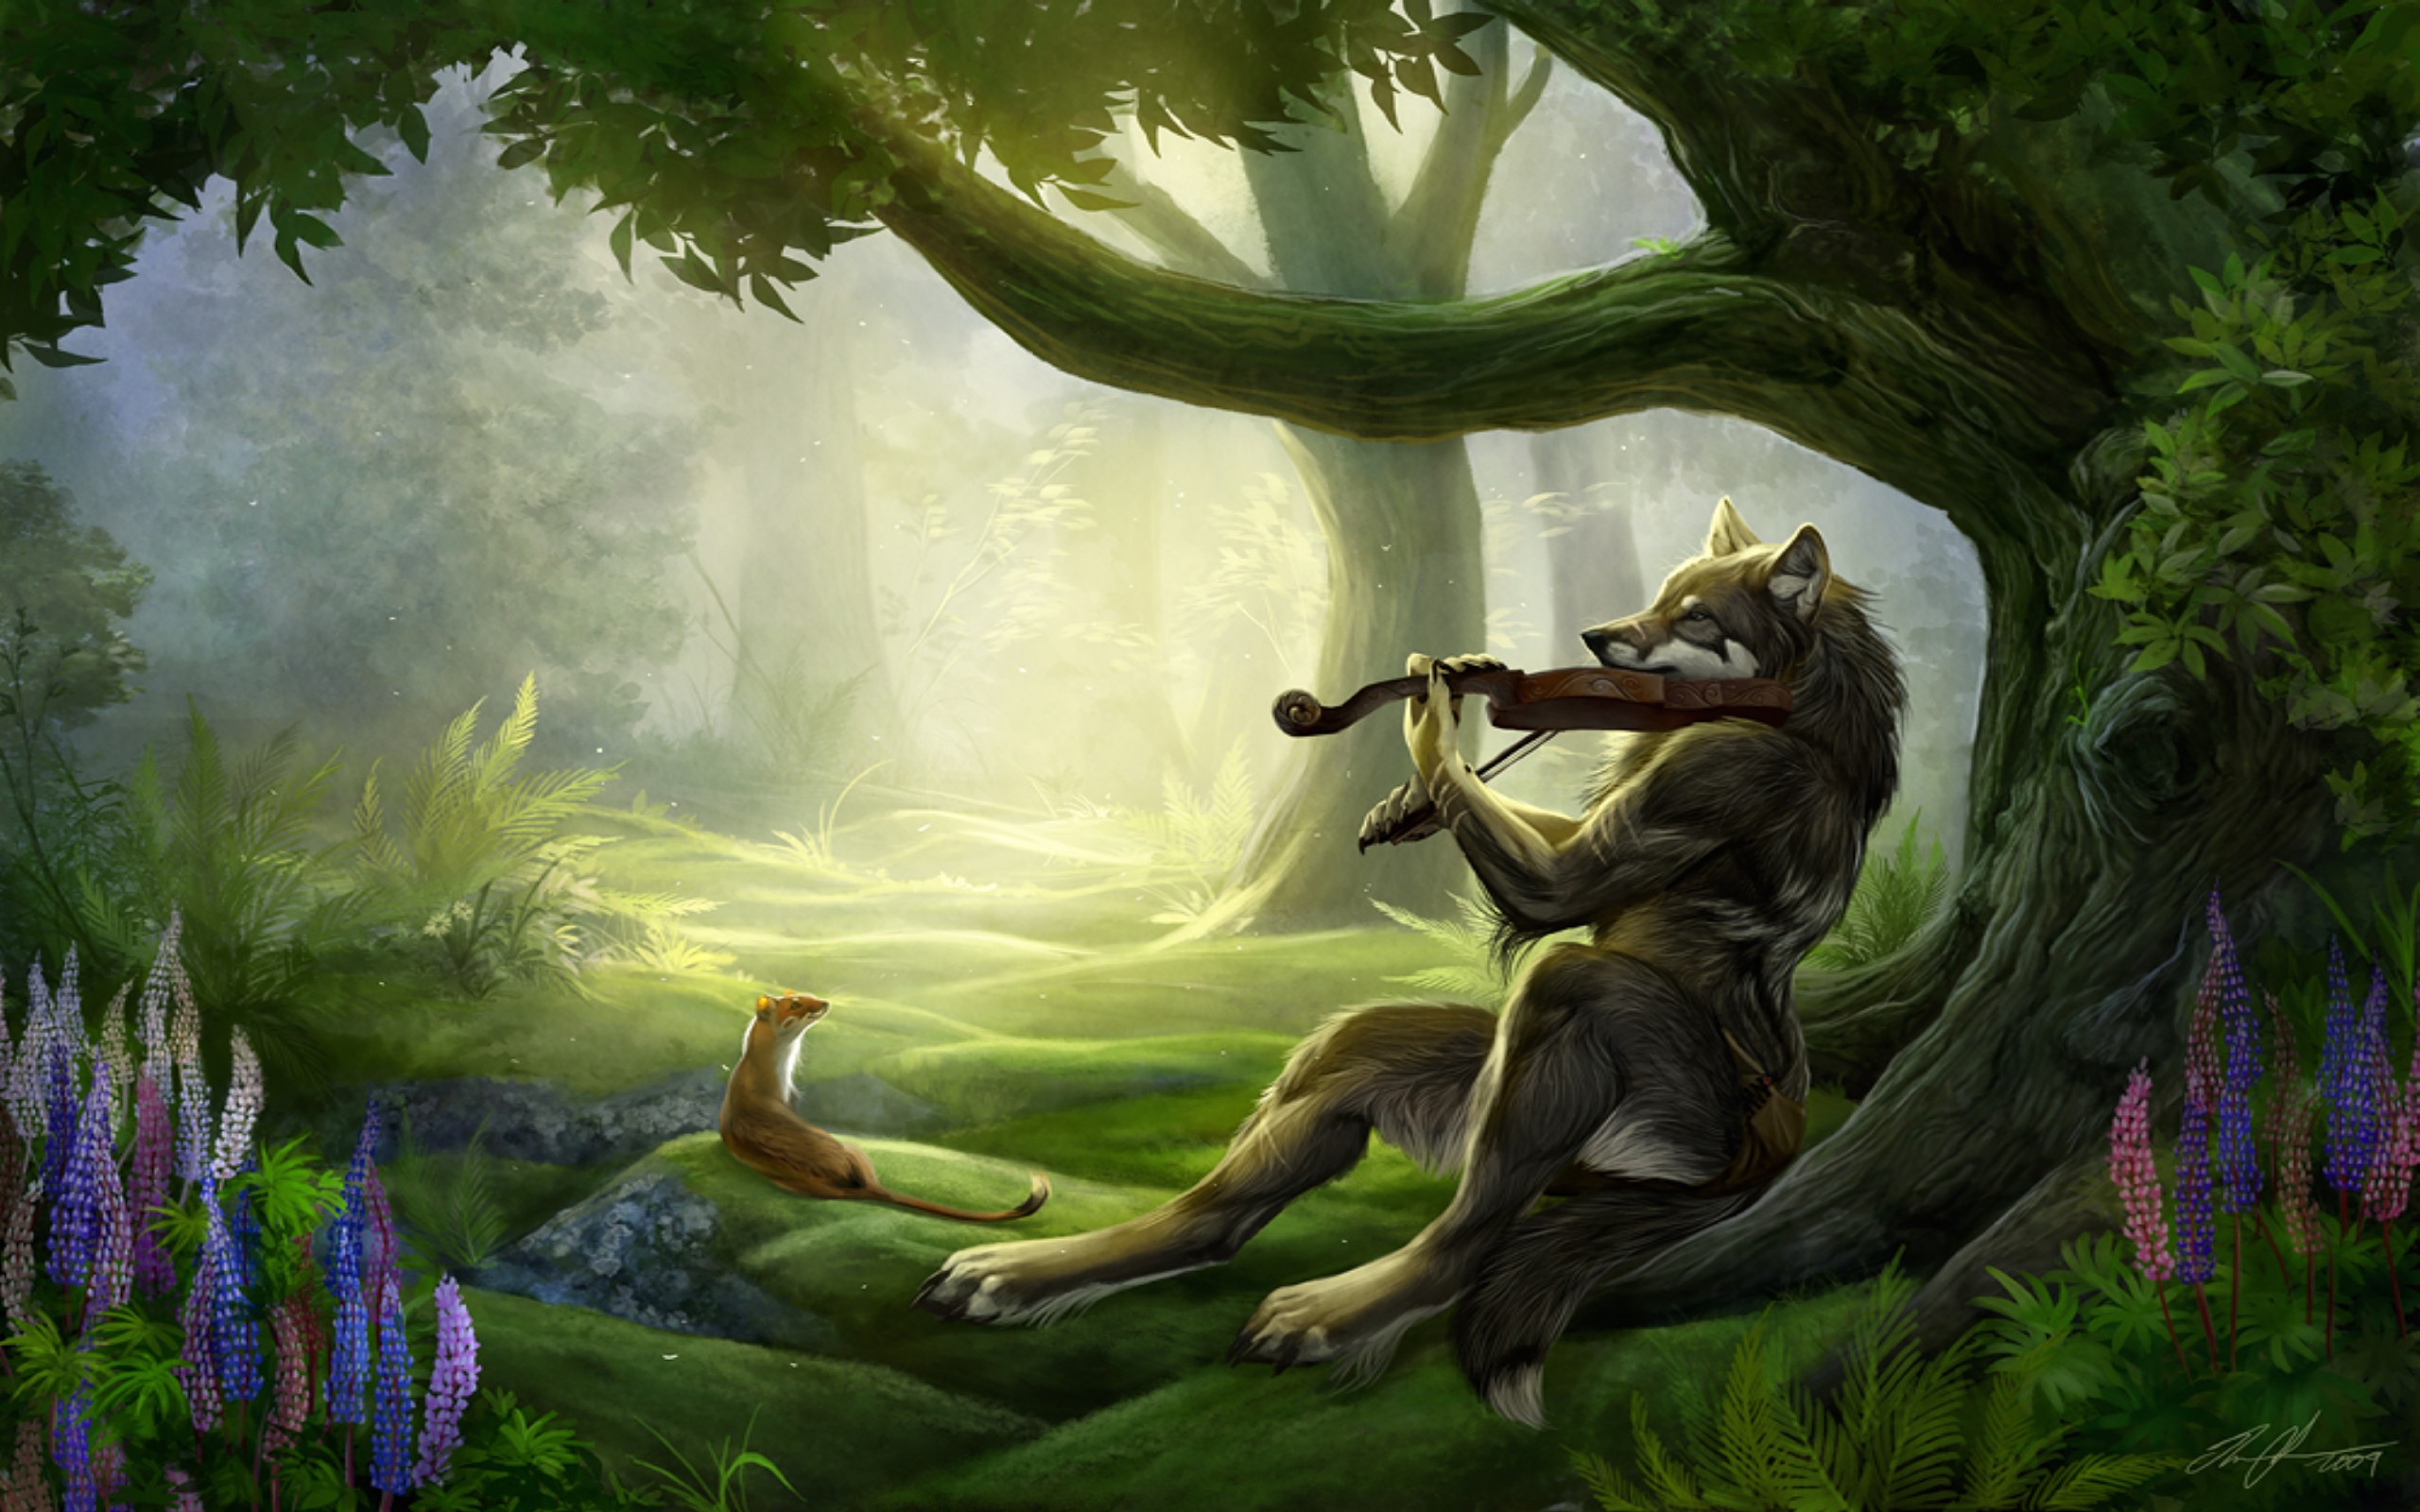 Playing In Nature desktop wallpaper by Therese Larsson, depicting a fantasy scene of a wolf playing a violin in a forest with a tree.